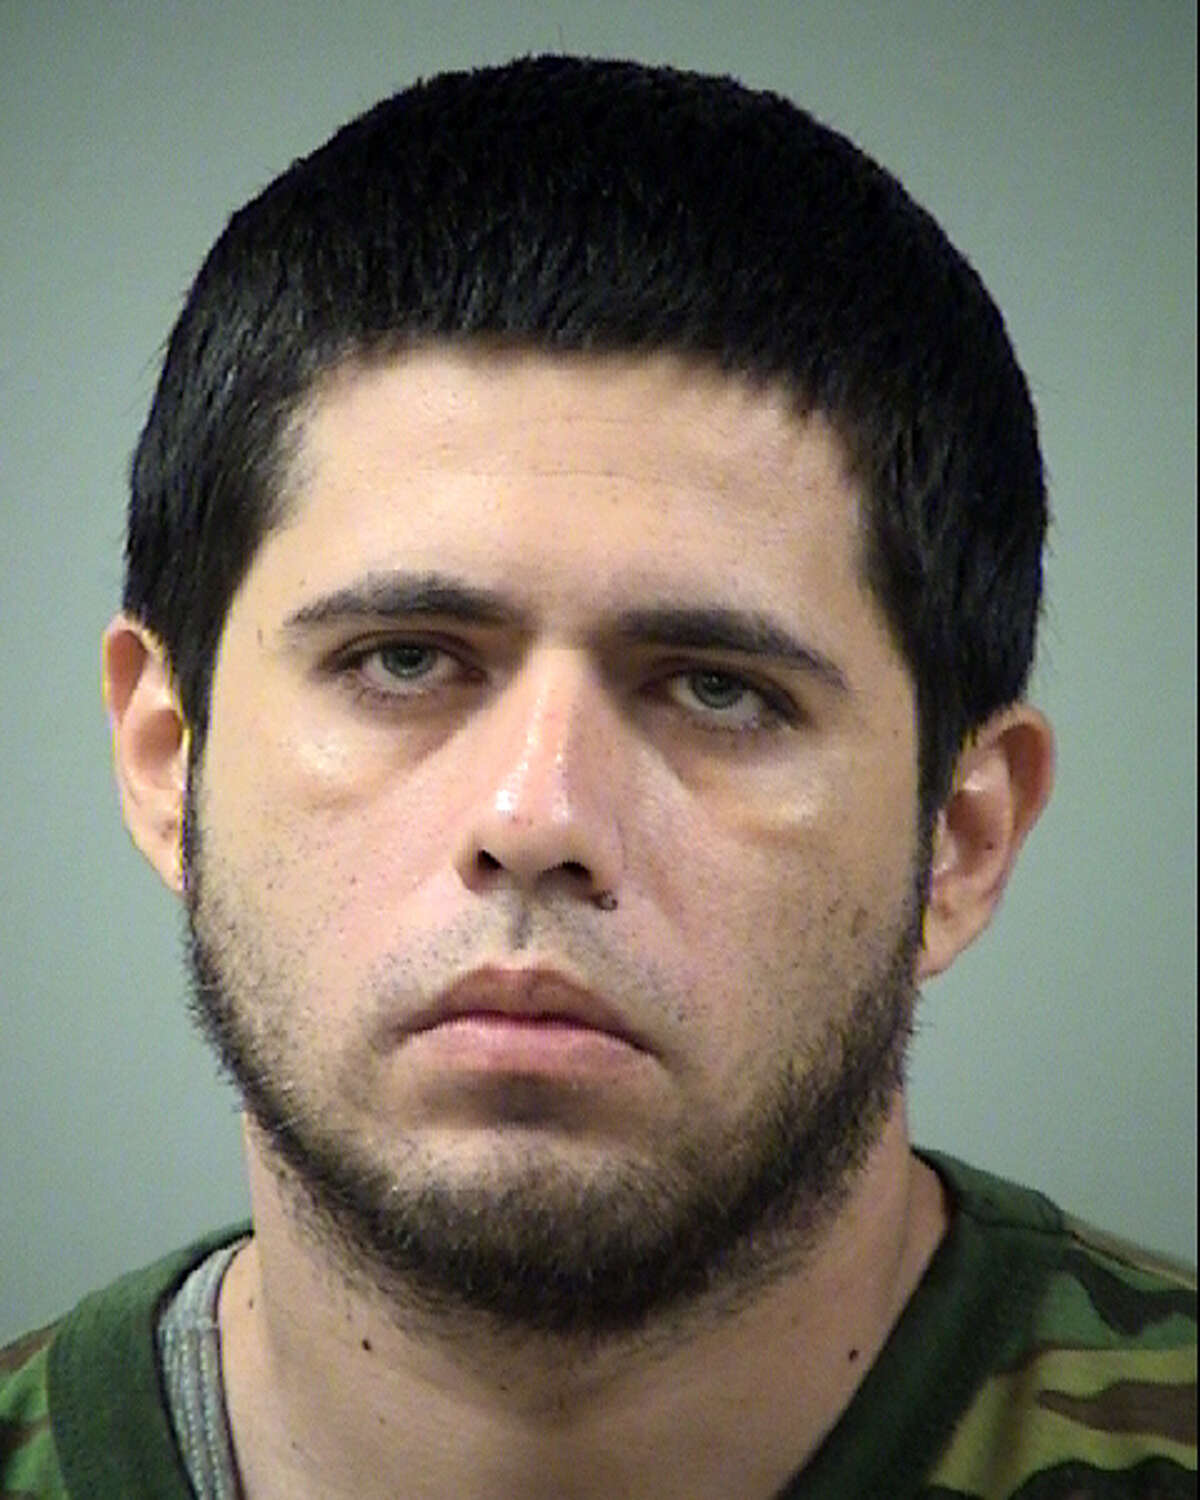 Robert Renobato, 33, was arrested on Thursday night following a brief chase.